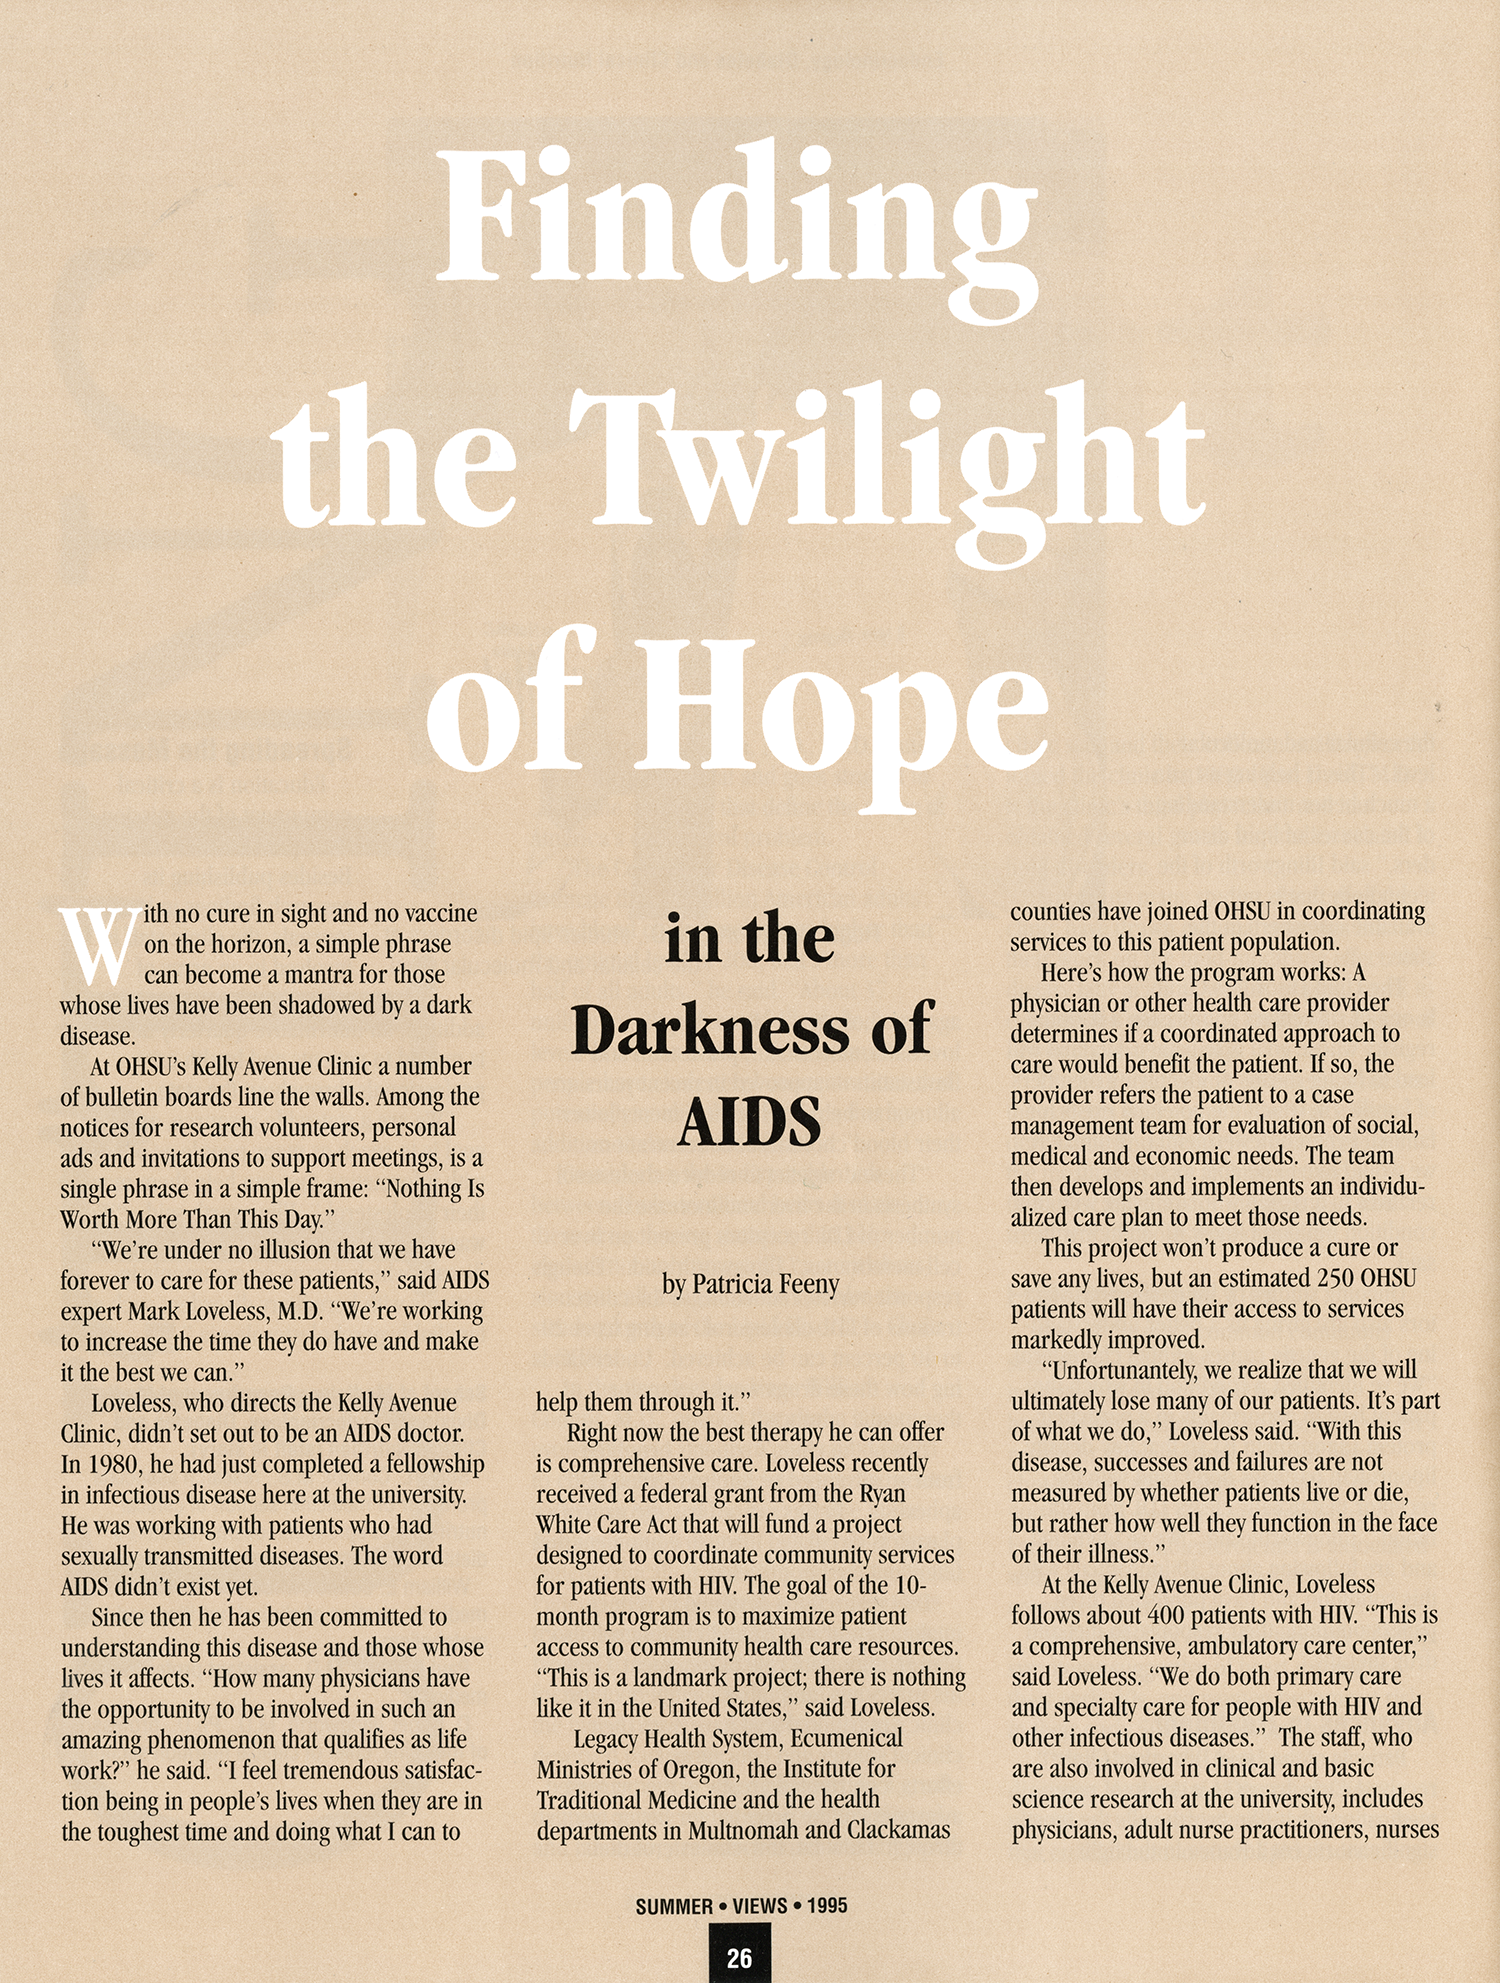 Article preview of "Finding the Twilight of Hope in the Darkness of AIDS"